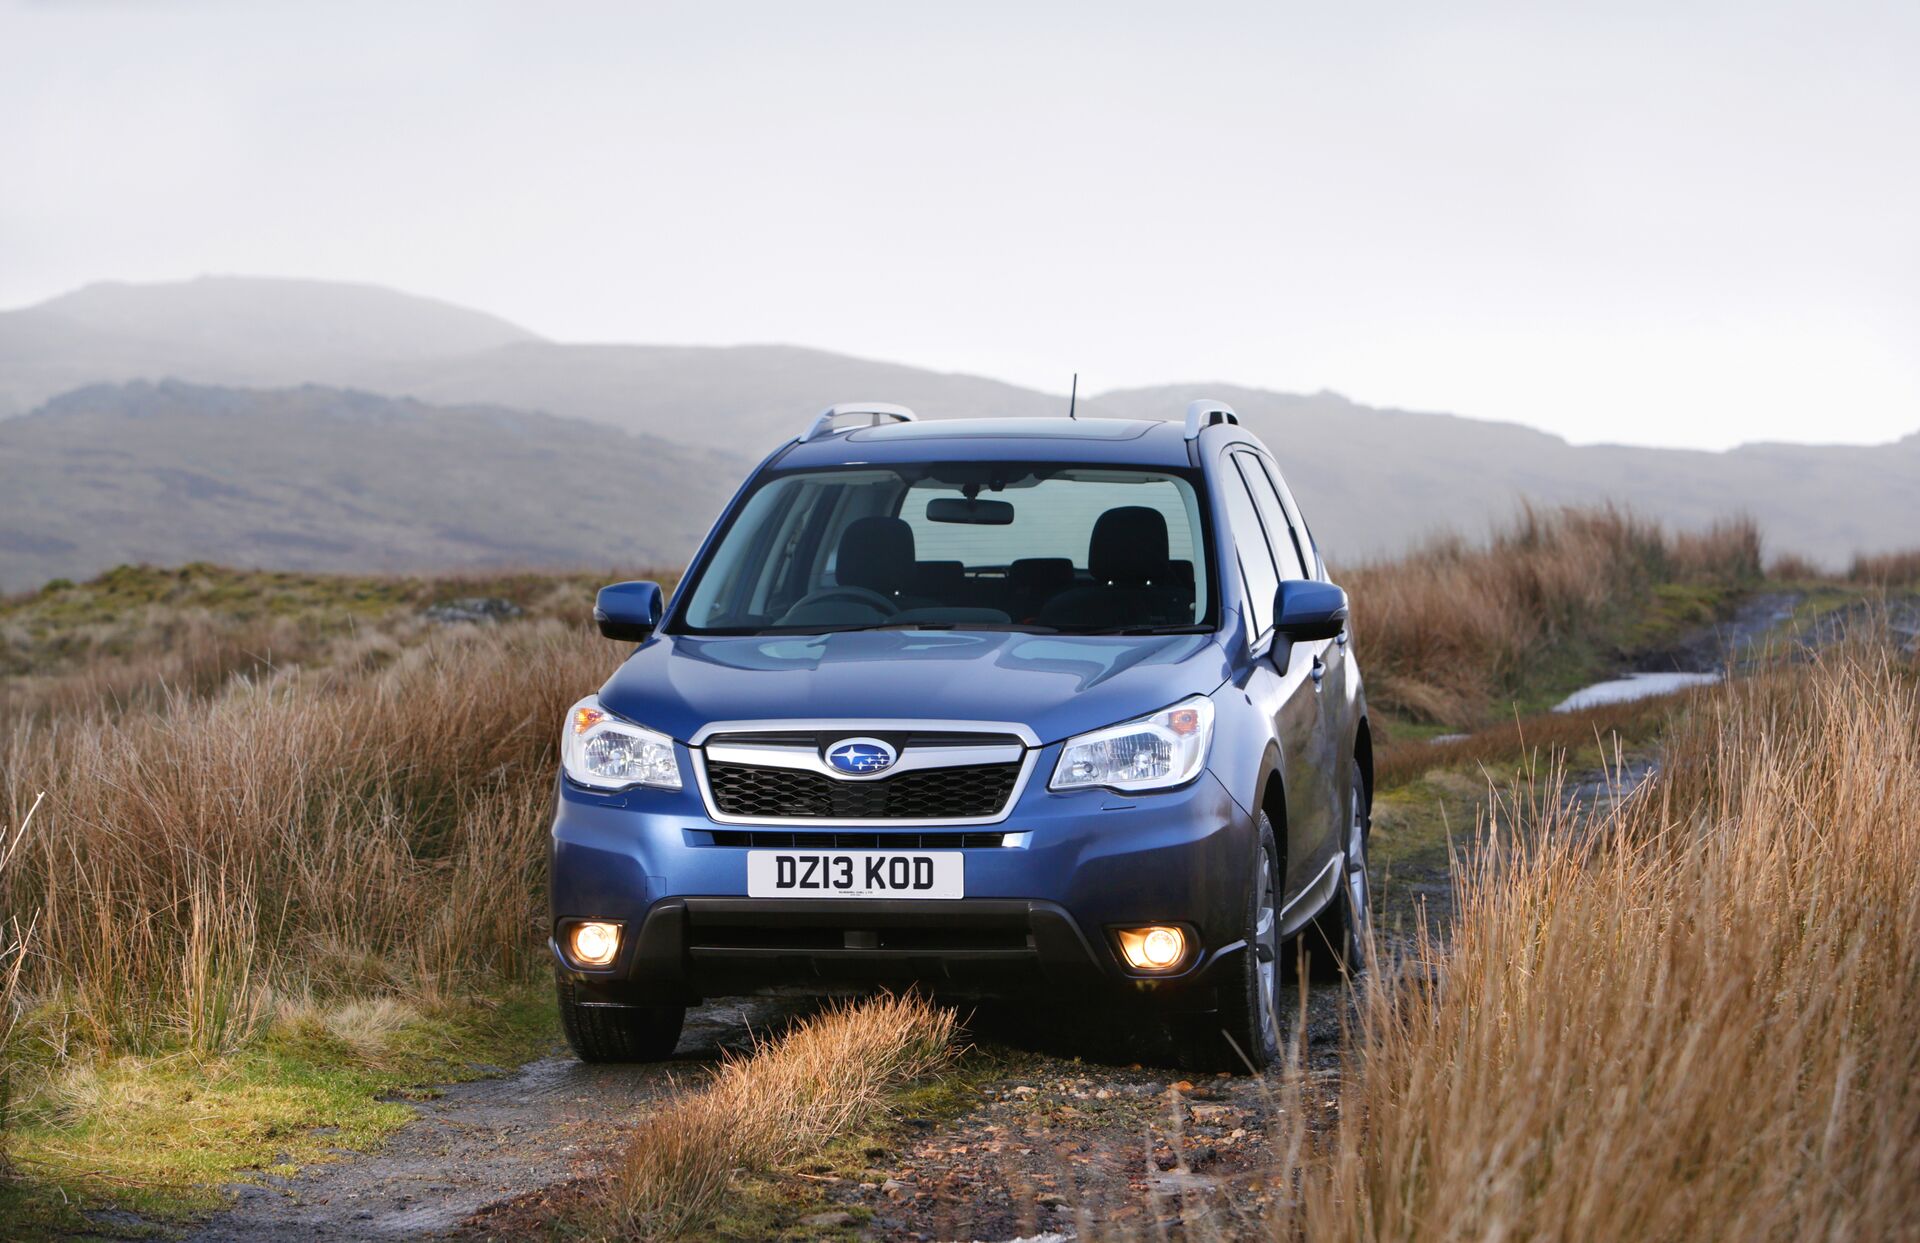 Subaru Forester IV 2.0 (150 Hp) 4WD 2012 2015 Specs and